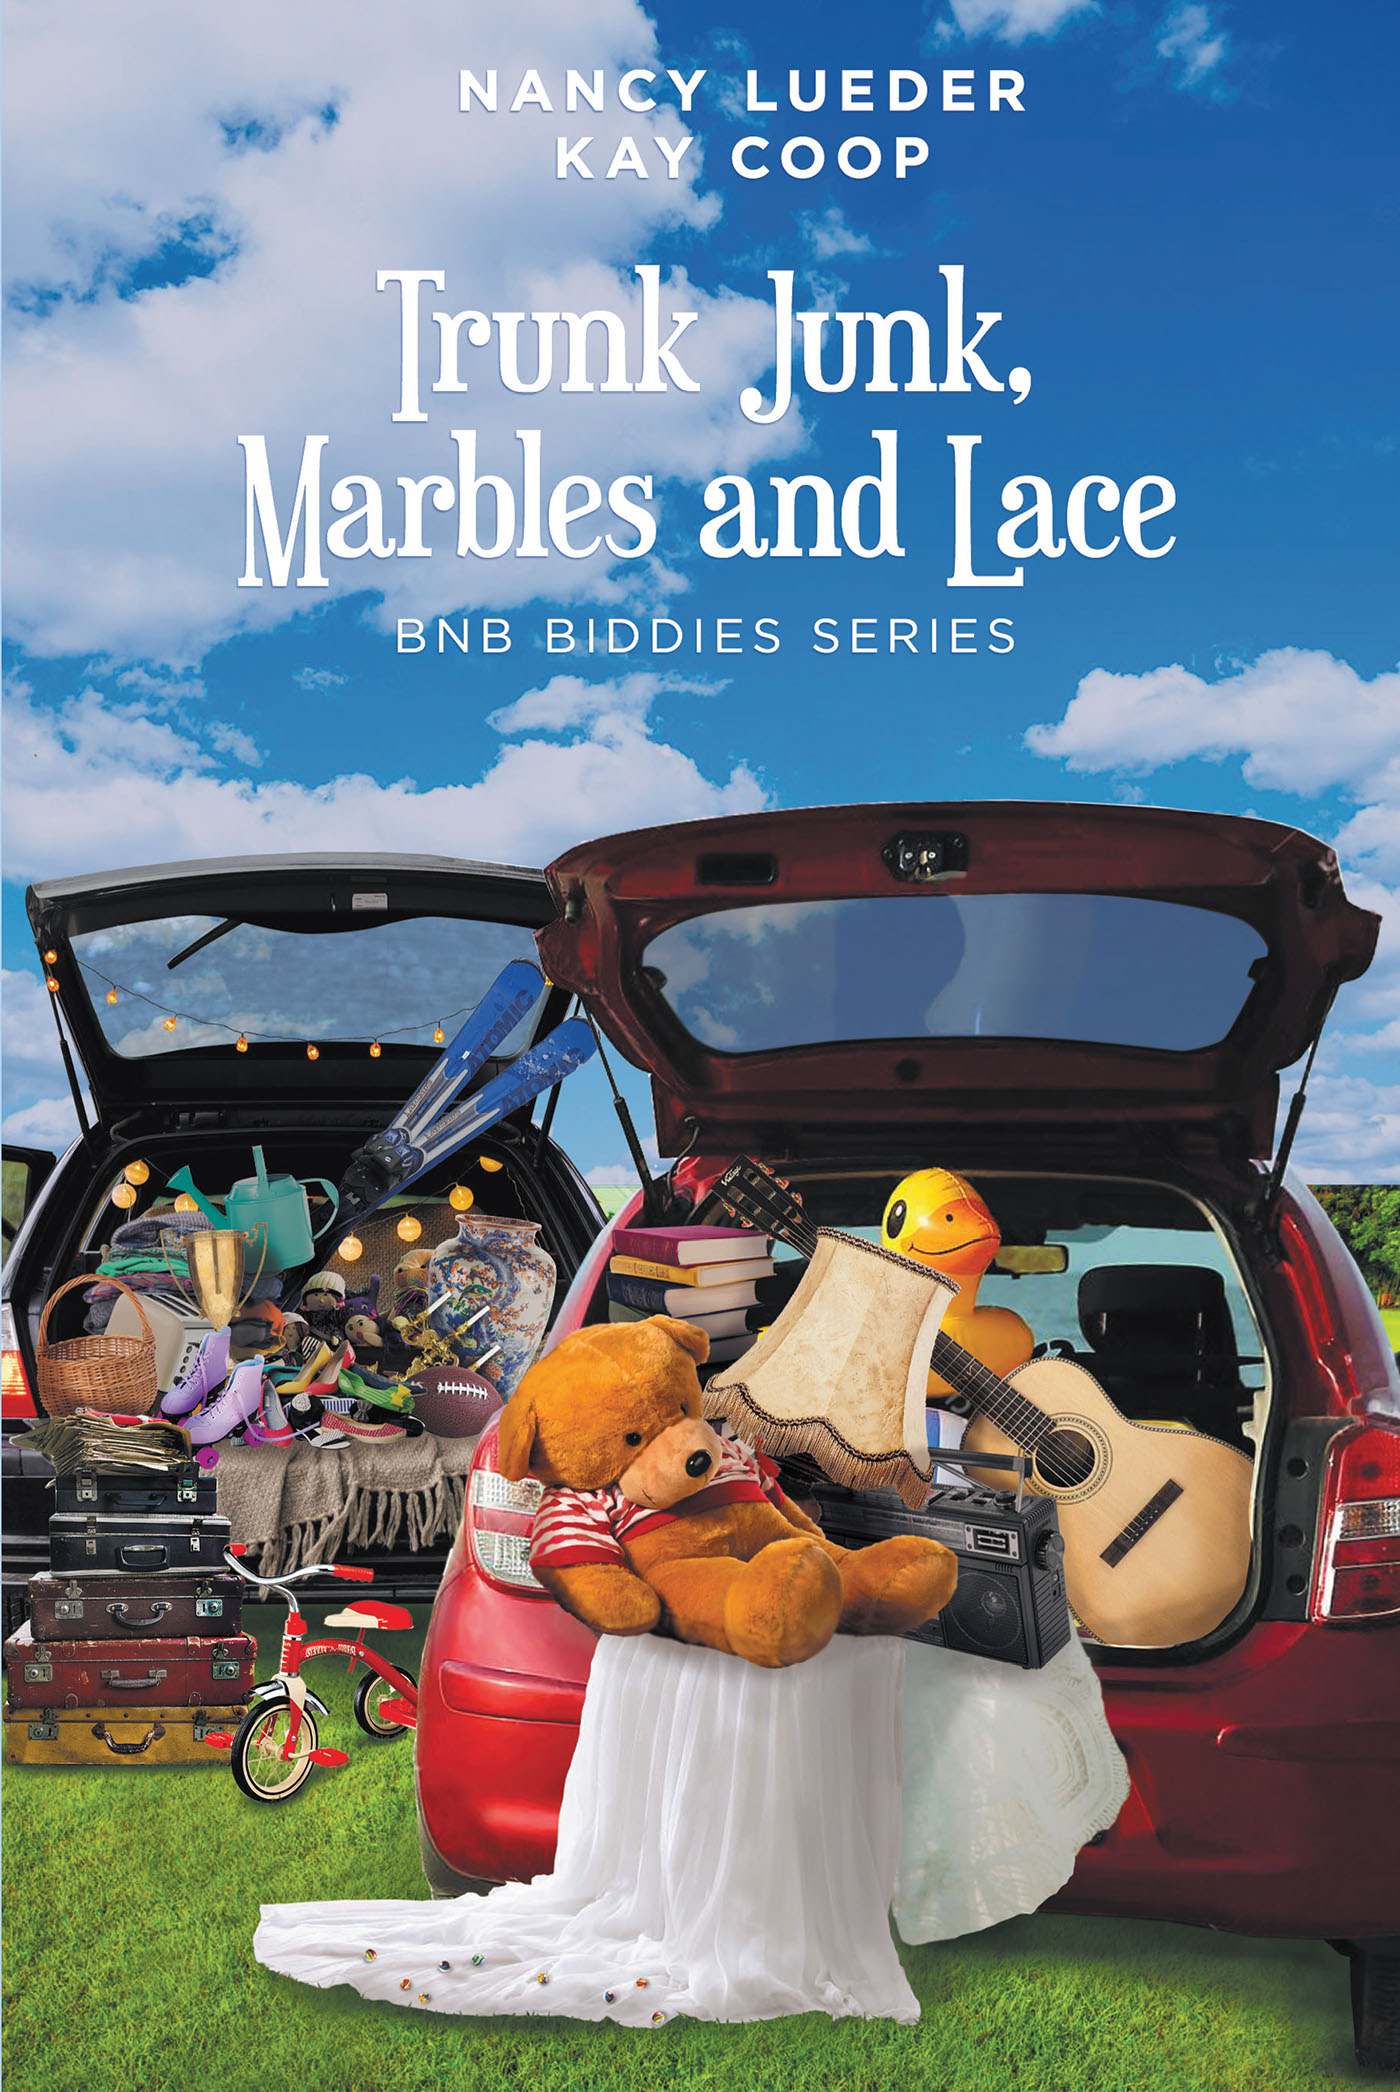 Kay Coop and Nancy Lueder’s New Book, "Trunk Junk, Marbles and Lace," Follows a Group of Friends as They Begin to Think About Their Futures and Consider Retirement